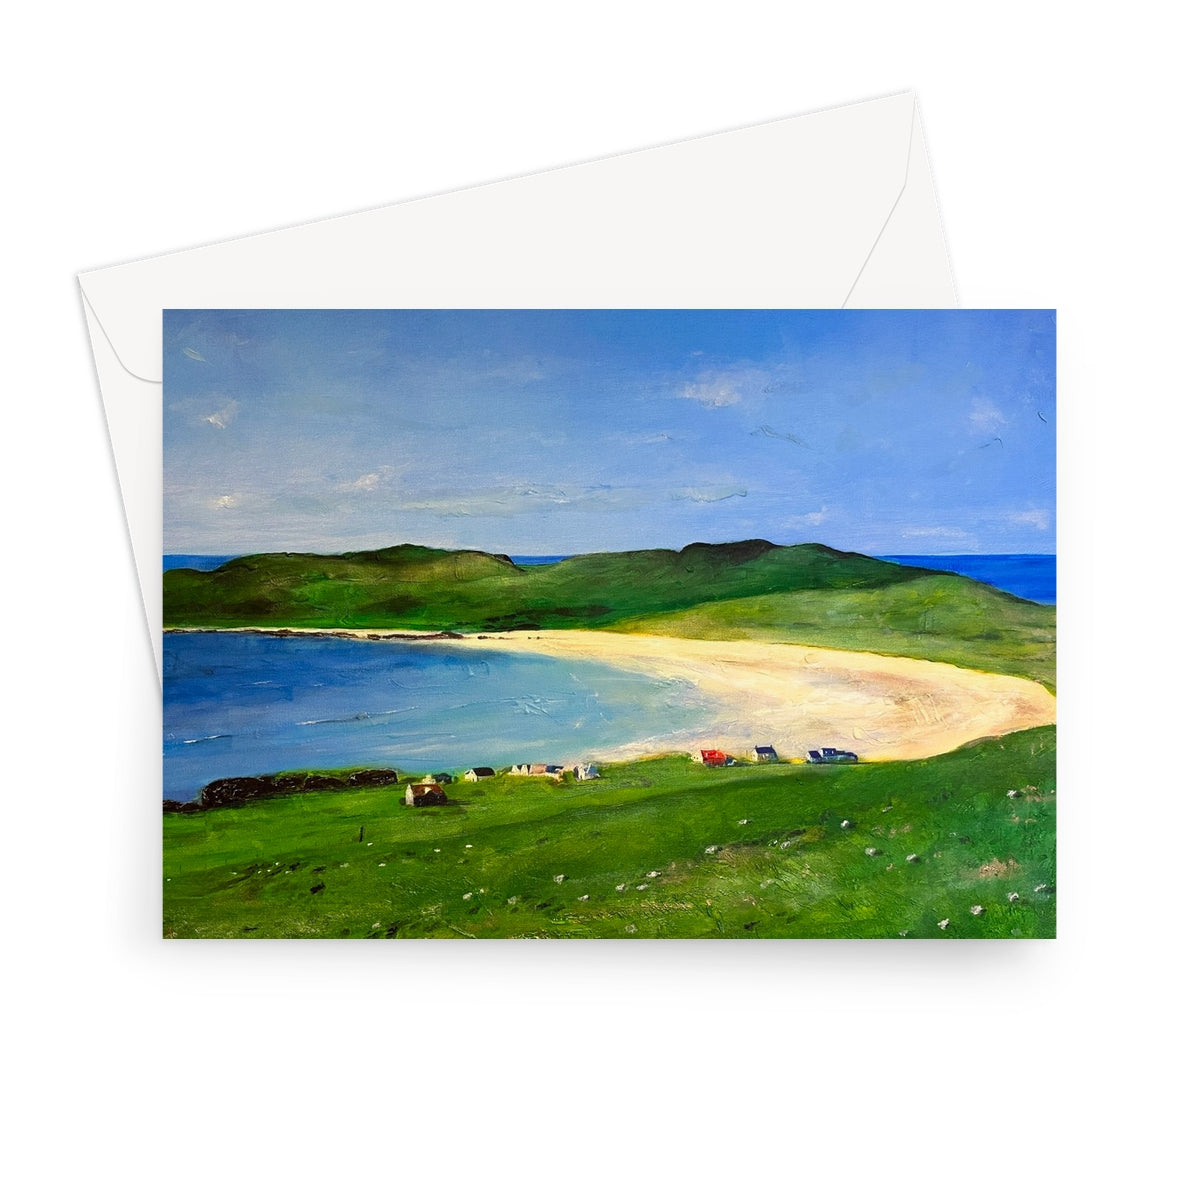 Balephuil Beach Tiree Art Gifts Greeting Card-Greetings Cards-Hebridean Islands Art Gallery-7"x5"-10 Cards-Paintings, Prints, Homeware, Art Gifts From Scotland By Scottish Artist Kevin Hunter